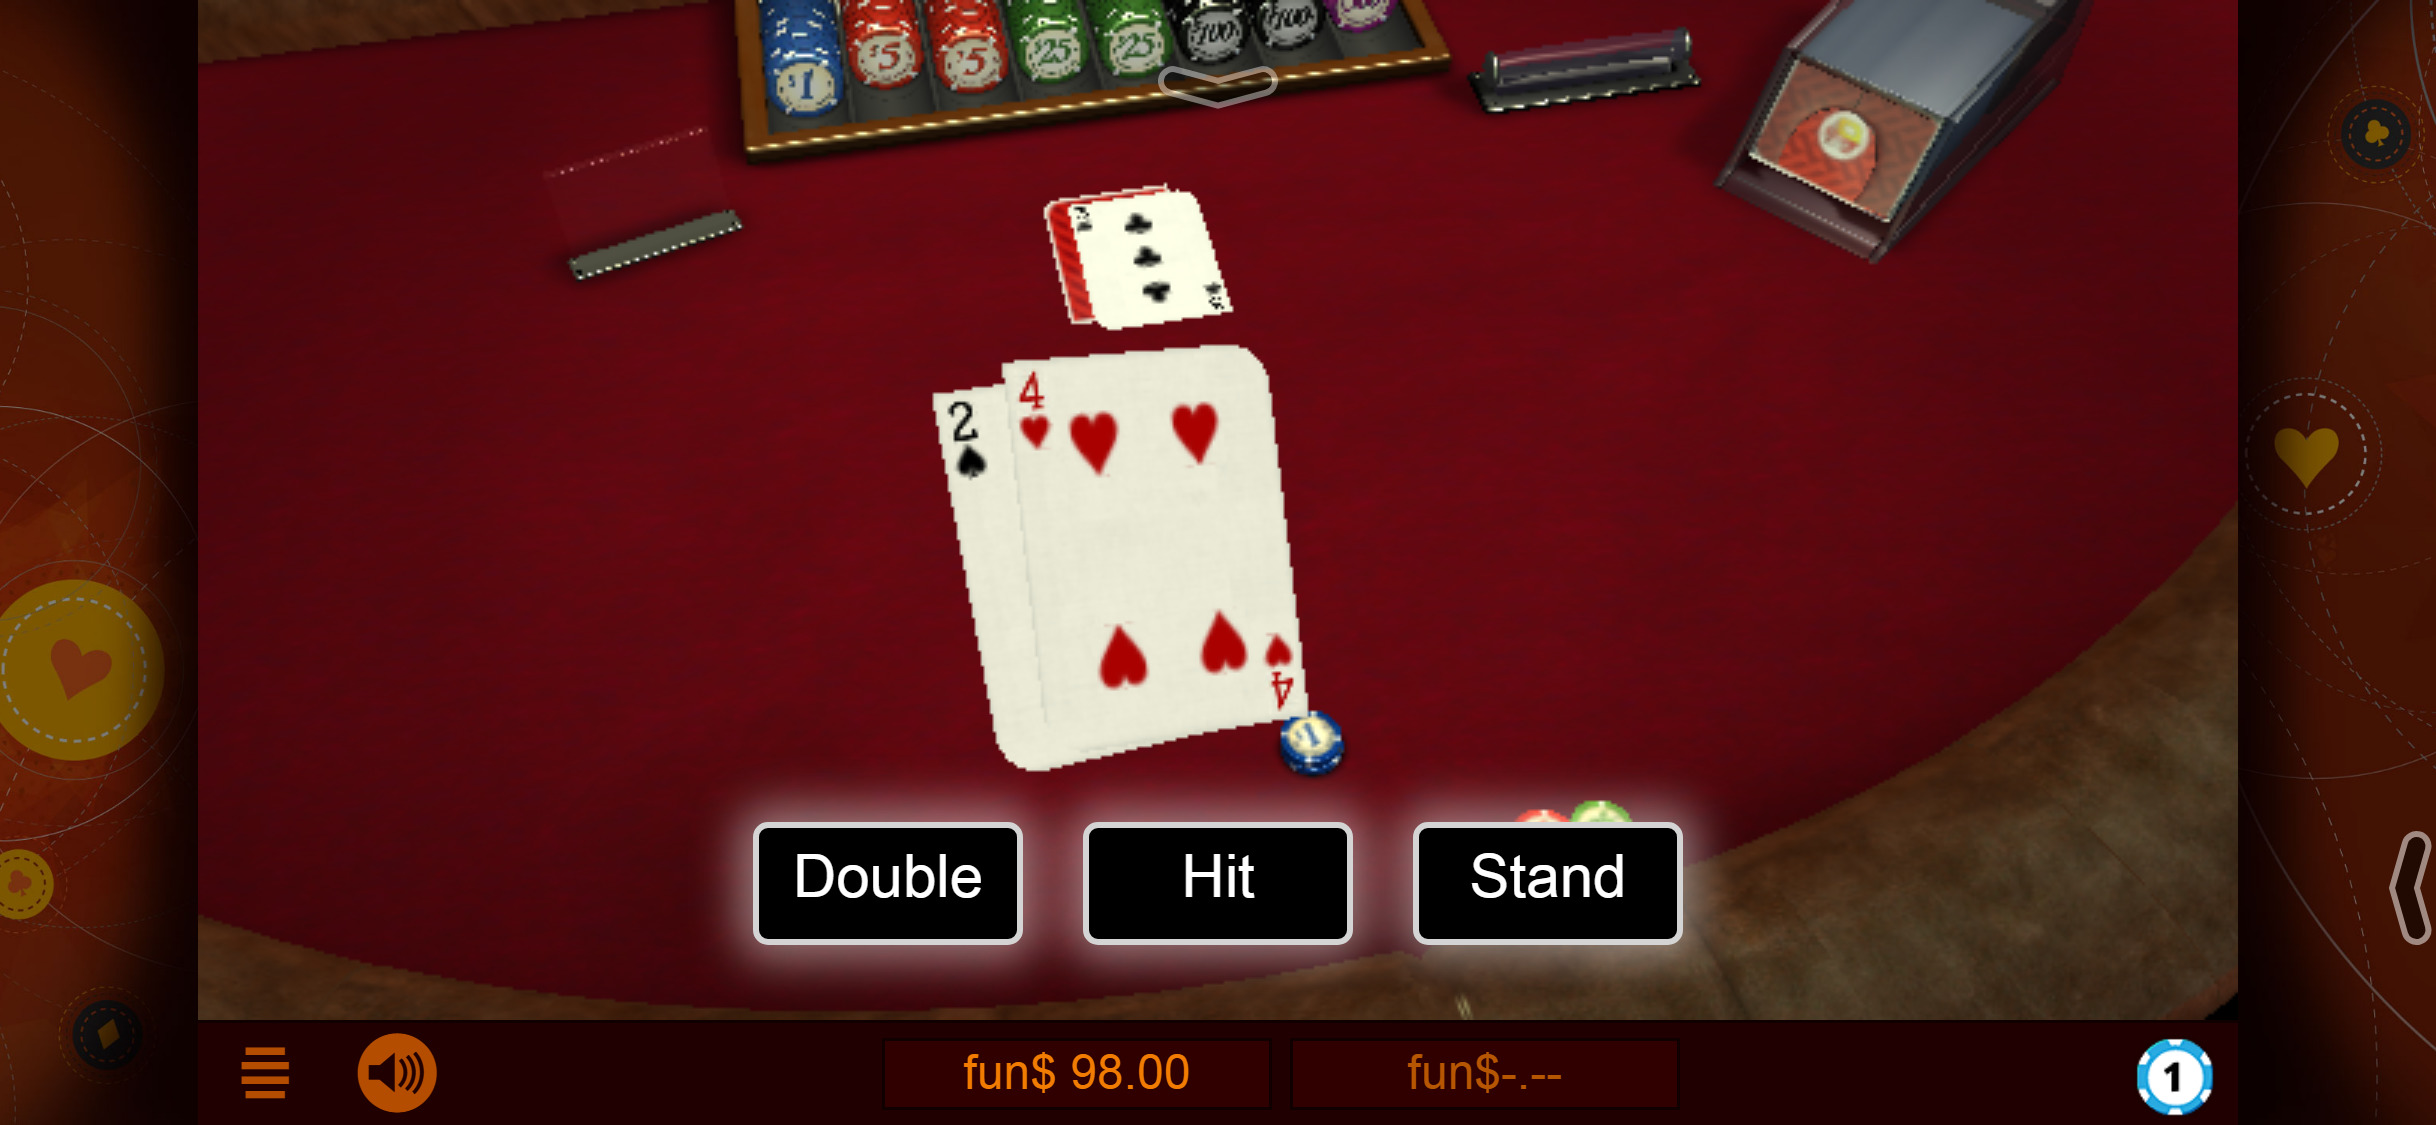 3 Dice Casino Mobile Slots Review